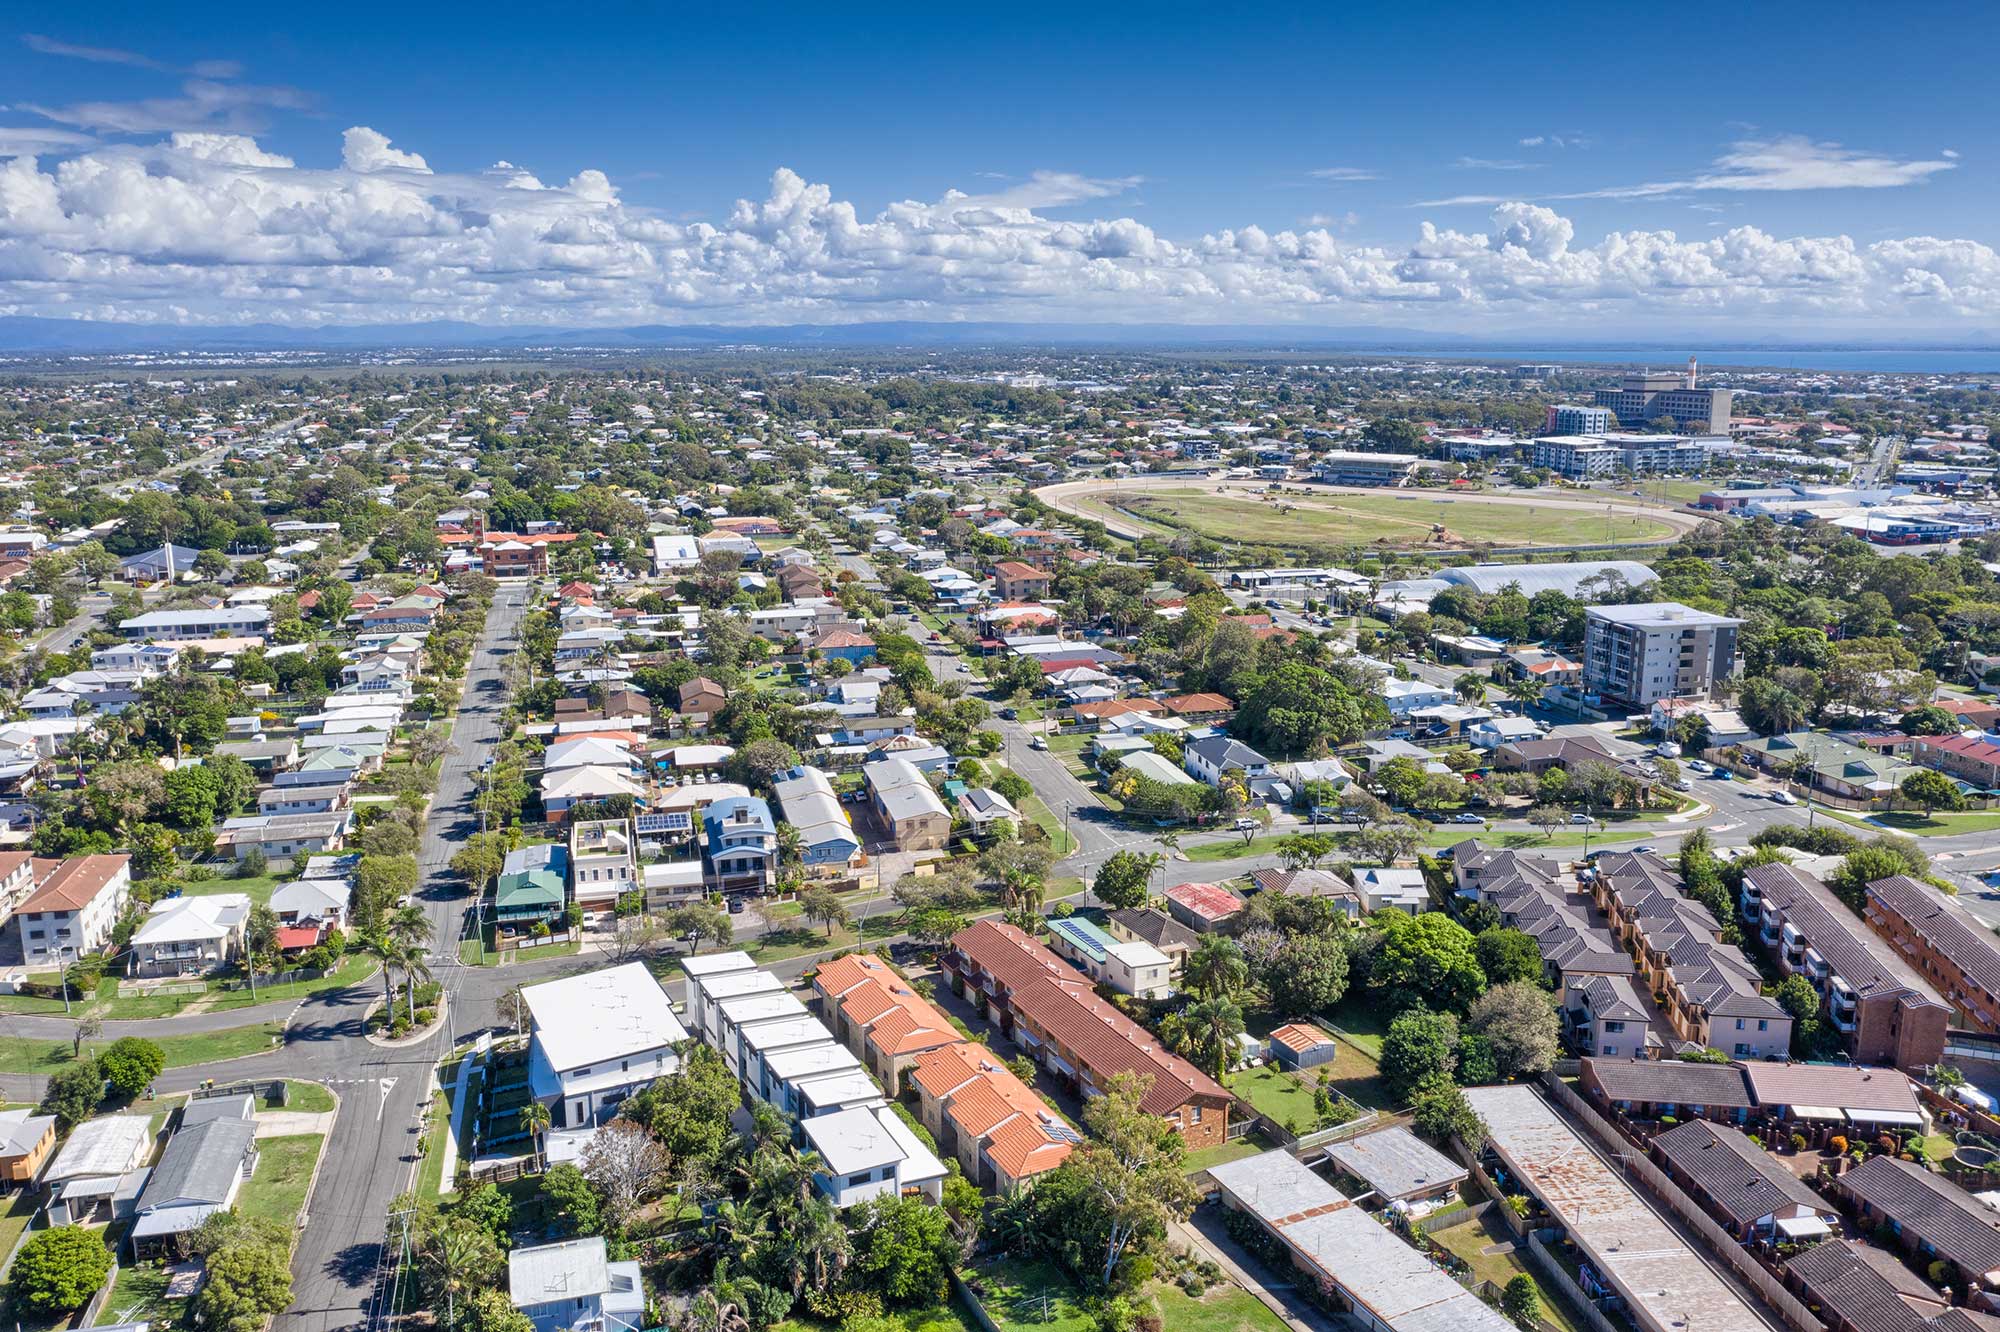 Drone photography at 37 Marine Parade for property development site  - 70m looking west